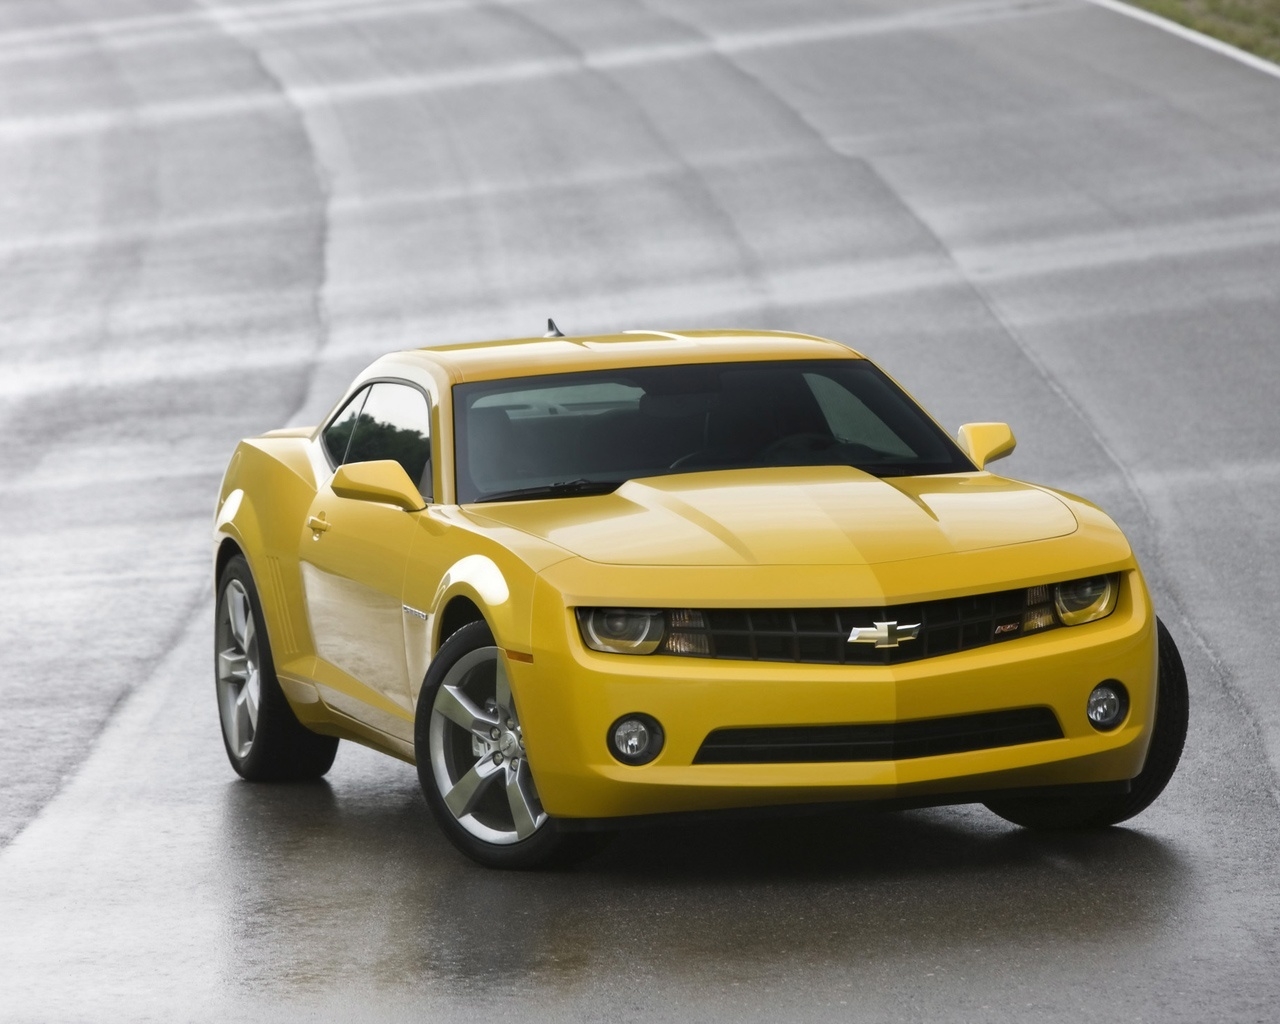 Chevrolet Camaro RS 2010 Yellow Front Angle for 1280 x 1024 resolution